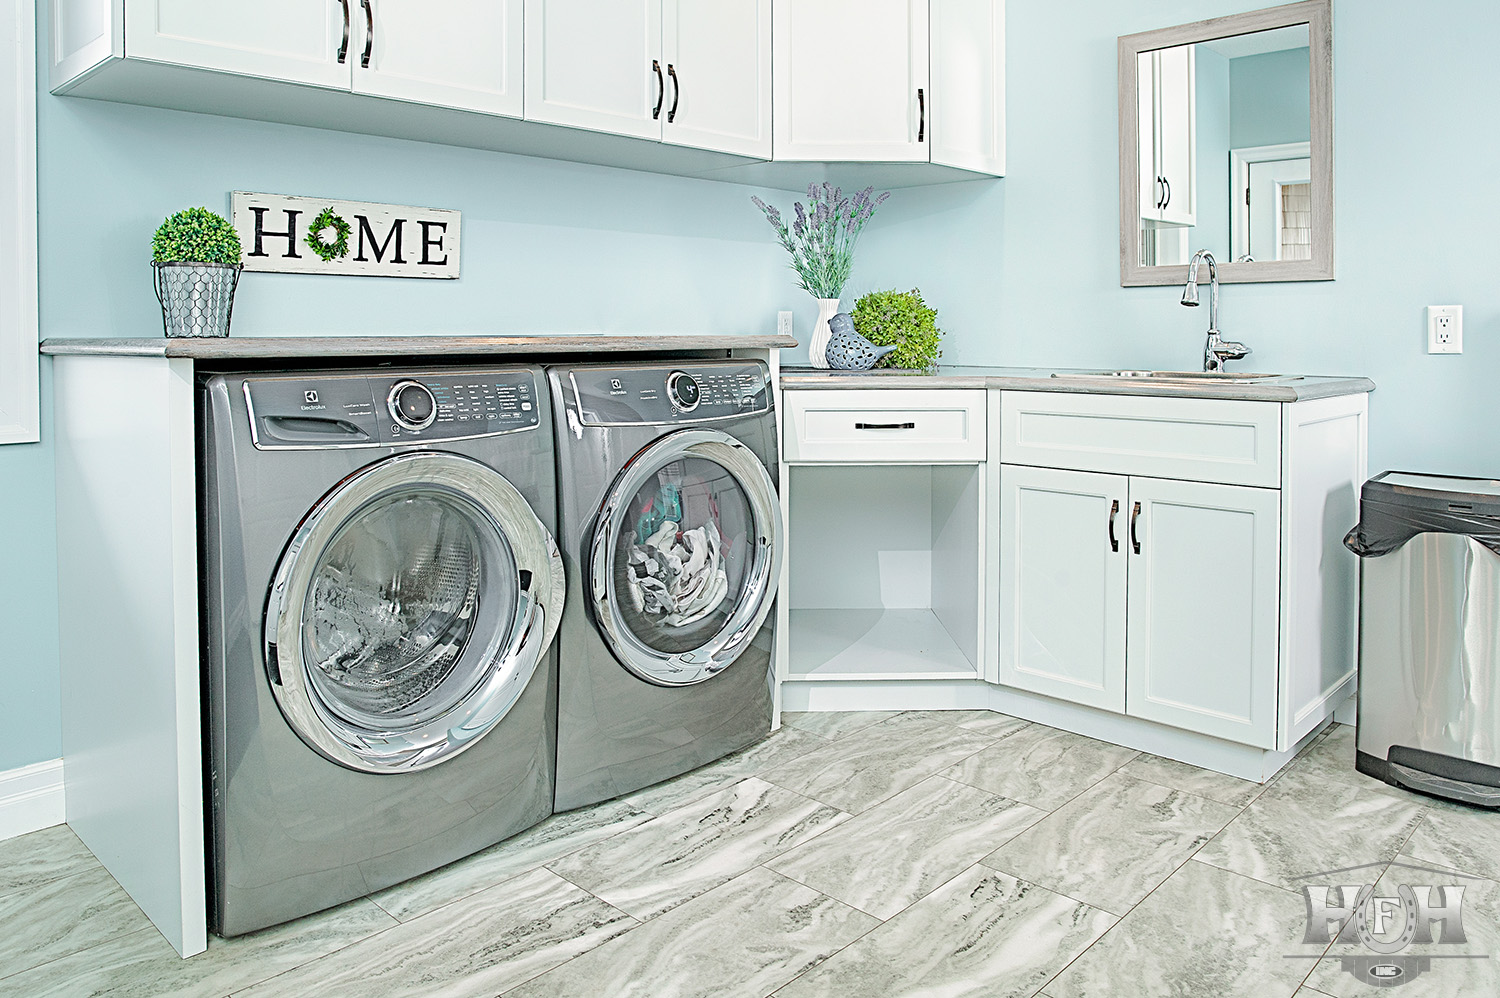 Laundry area with large electrolux washer and dryer